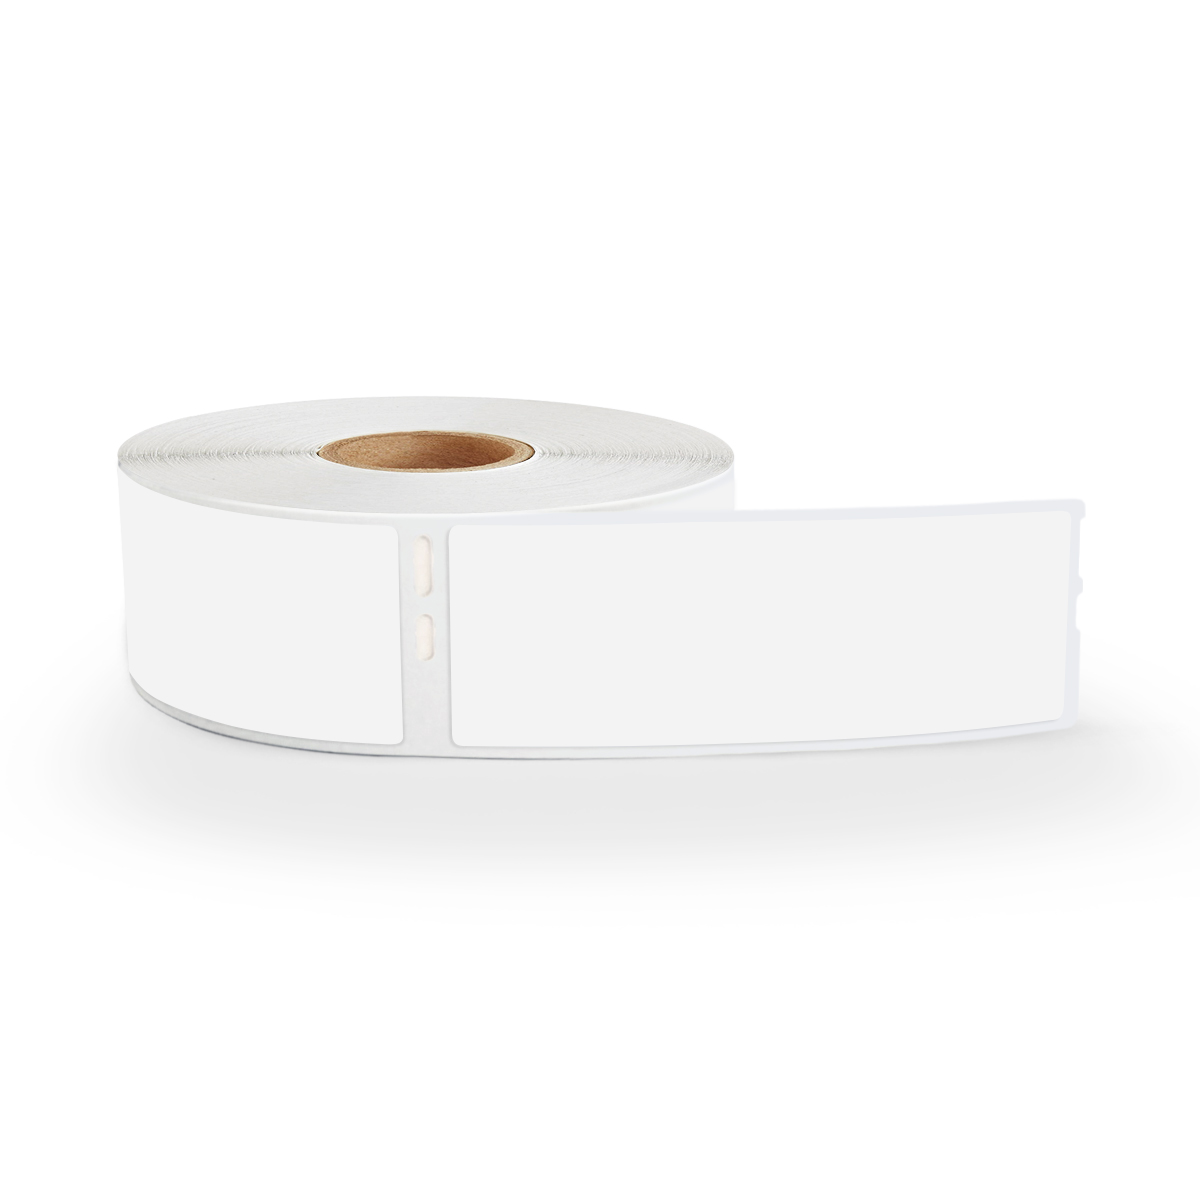 10 Rolls of Dymo 30252 Compatible White Return Address Labels for